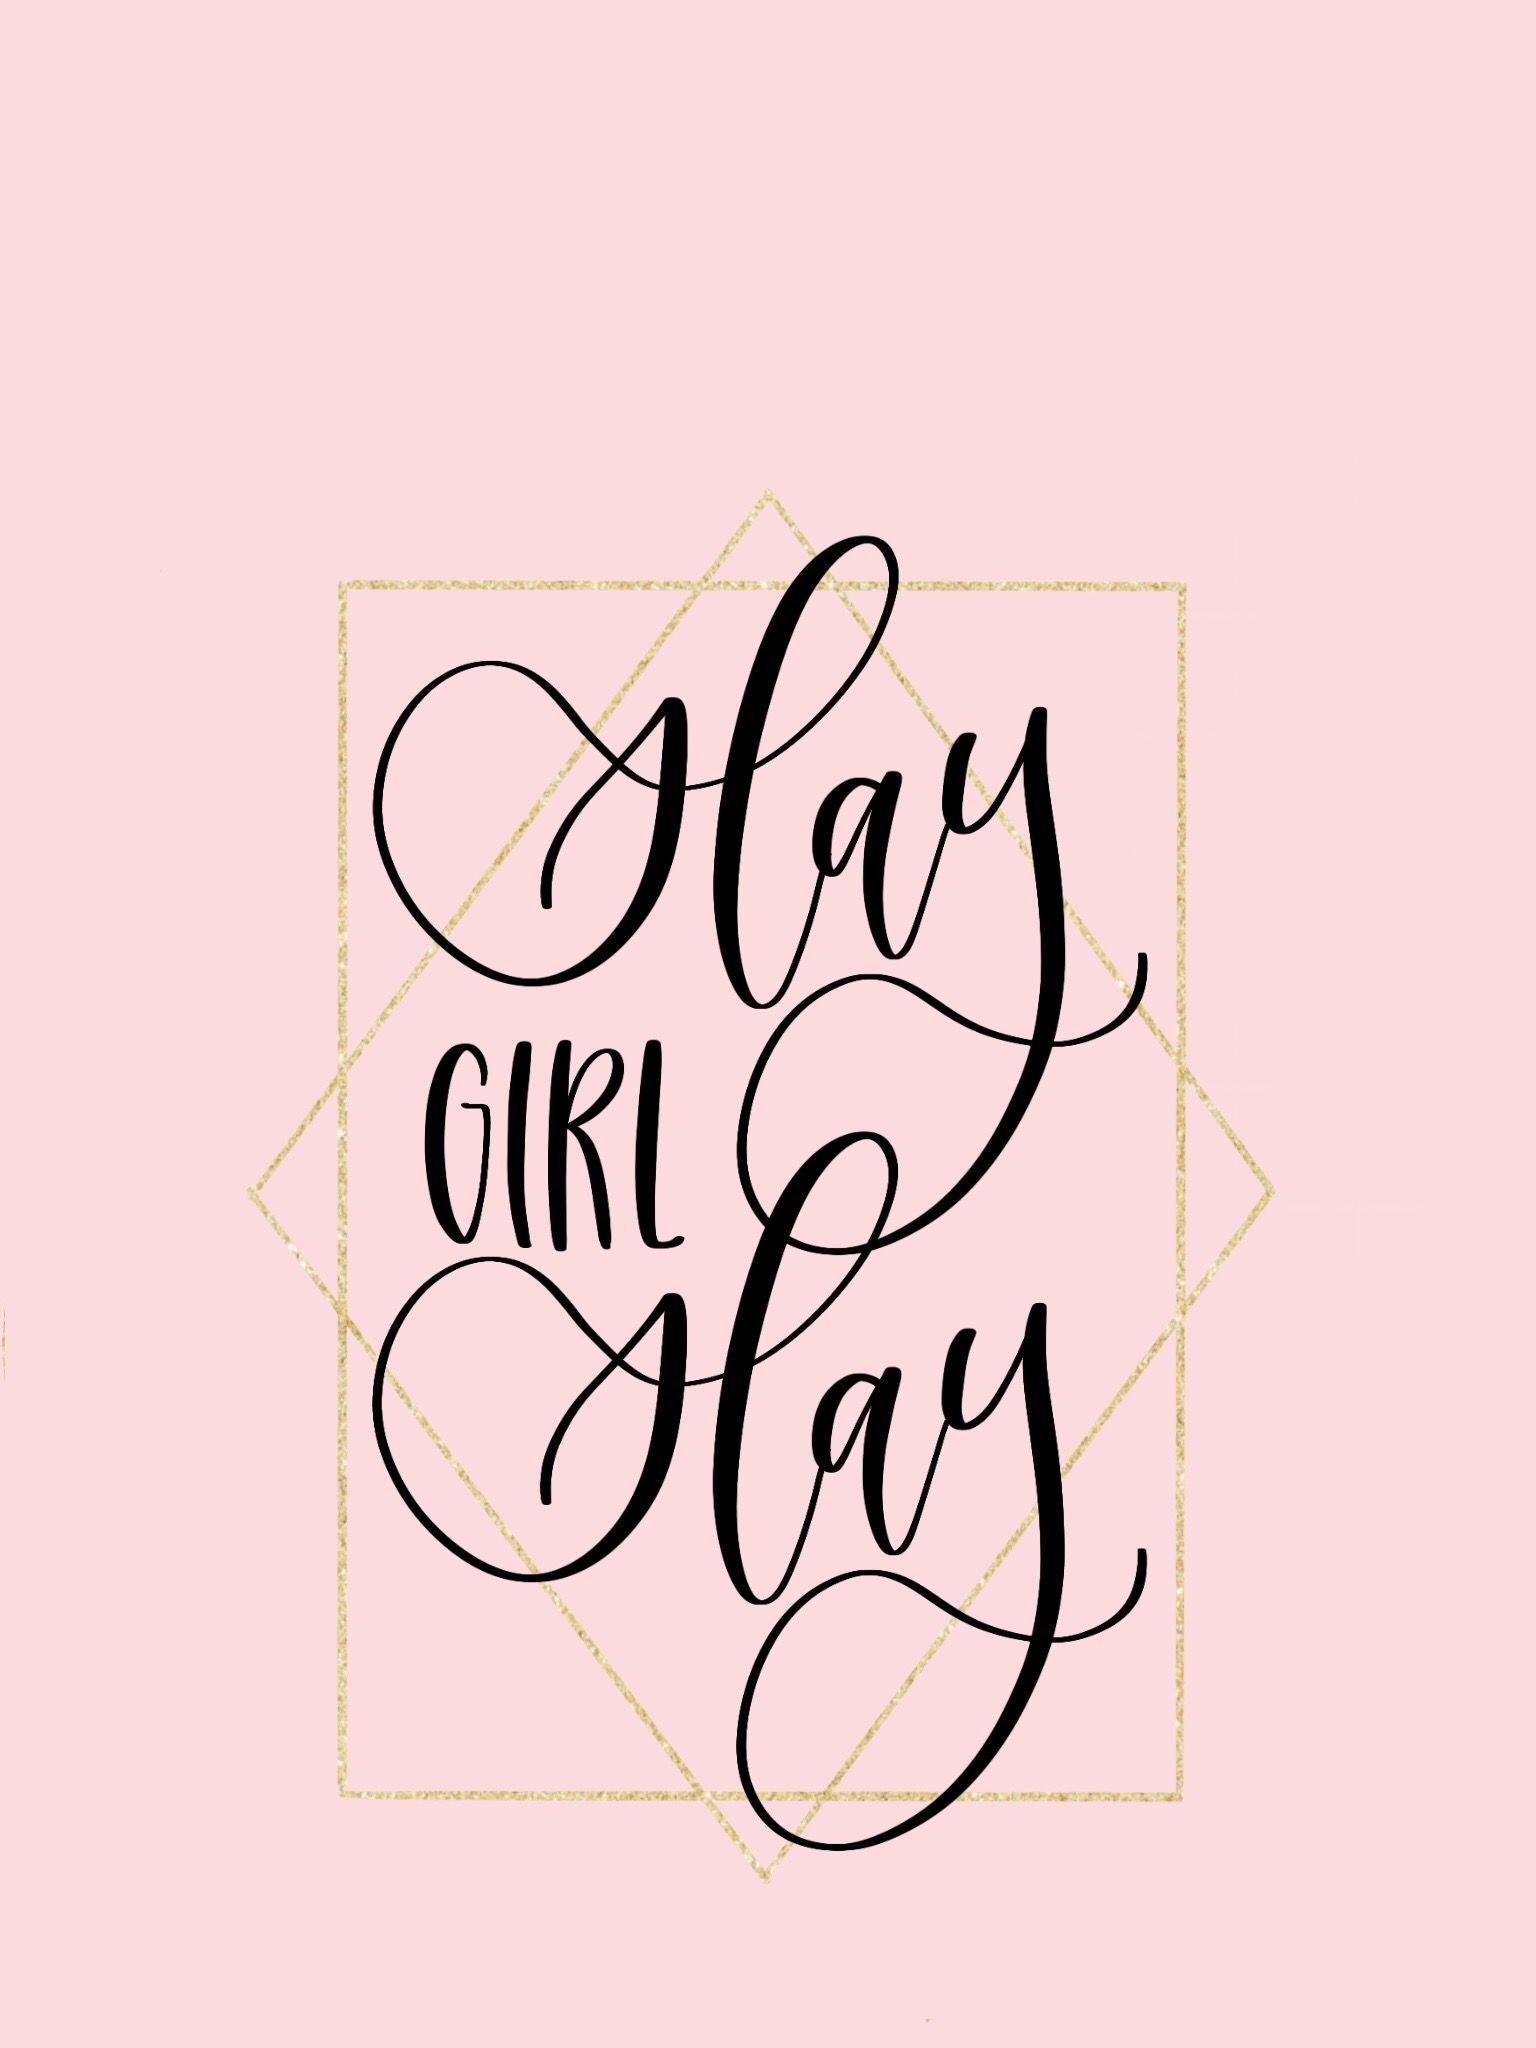 Slay Girl Slay Wallpaper by TheFreckledGoose. Free phone wallpaper, Phone background, Wall decor printables